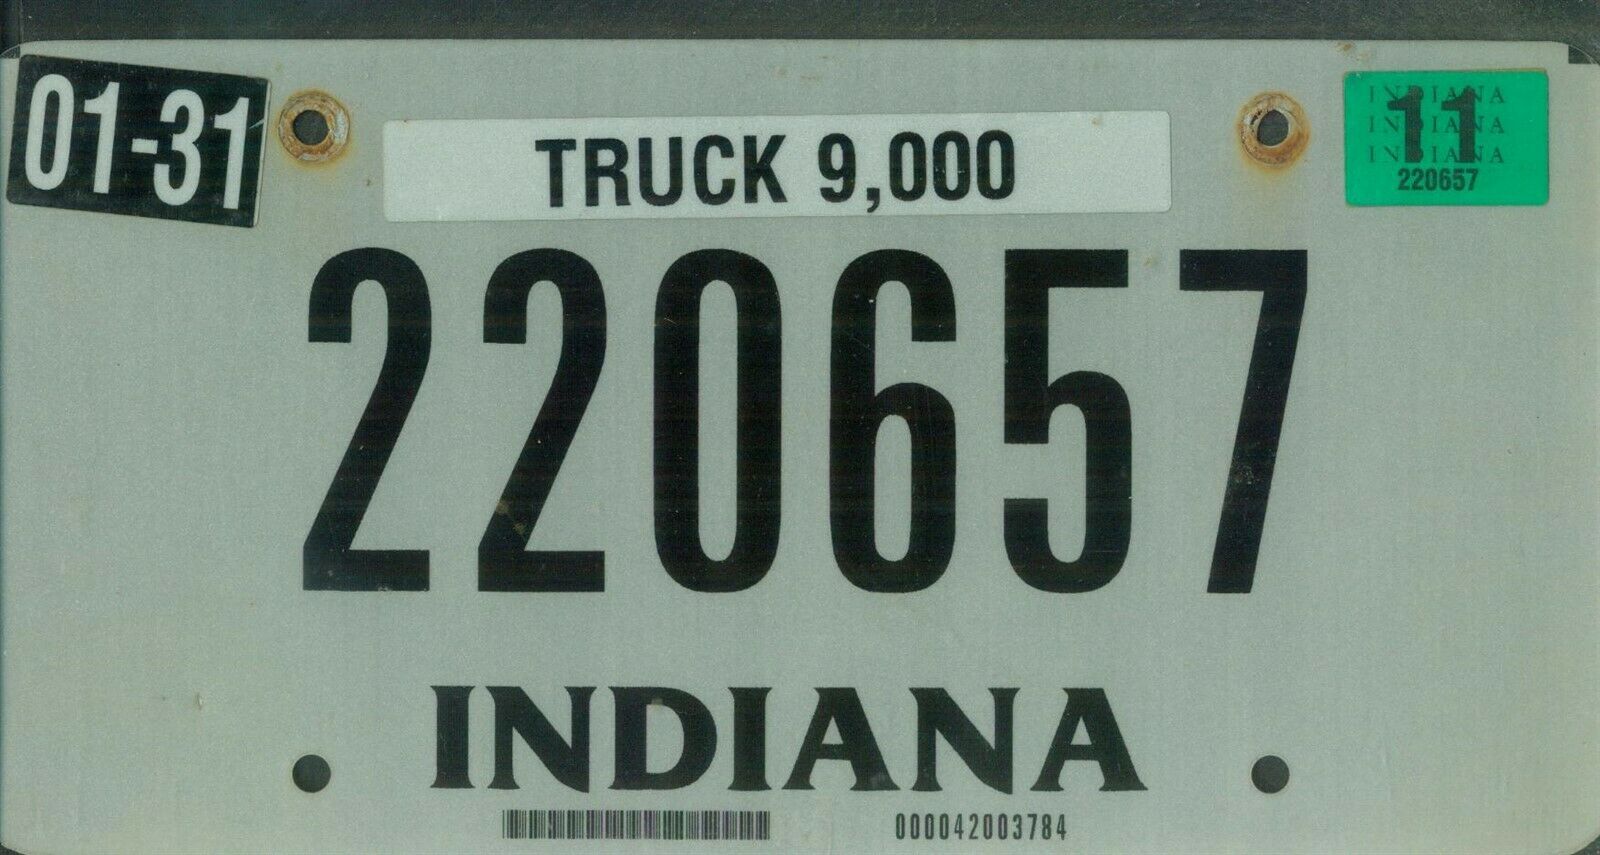 Indiana 2011 License Plate "220657"